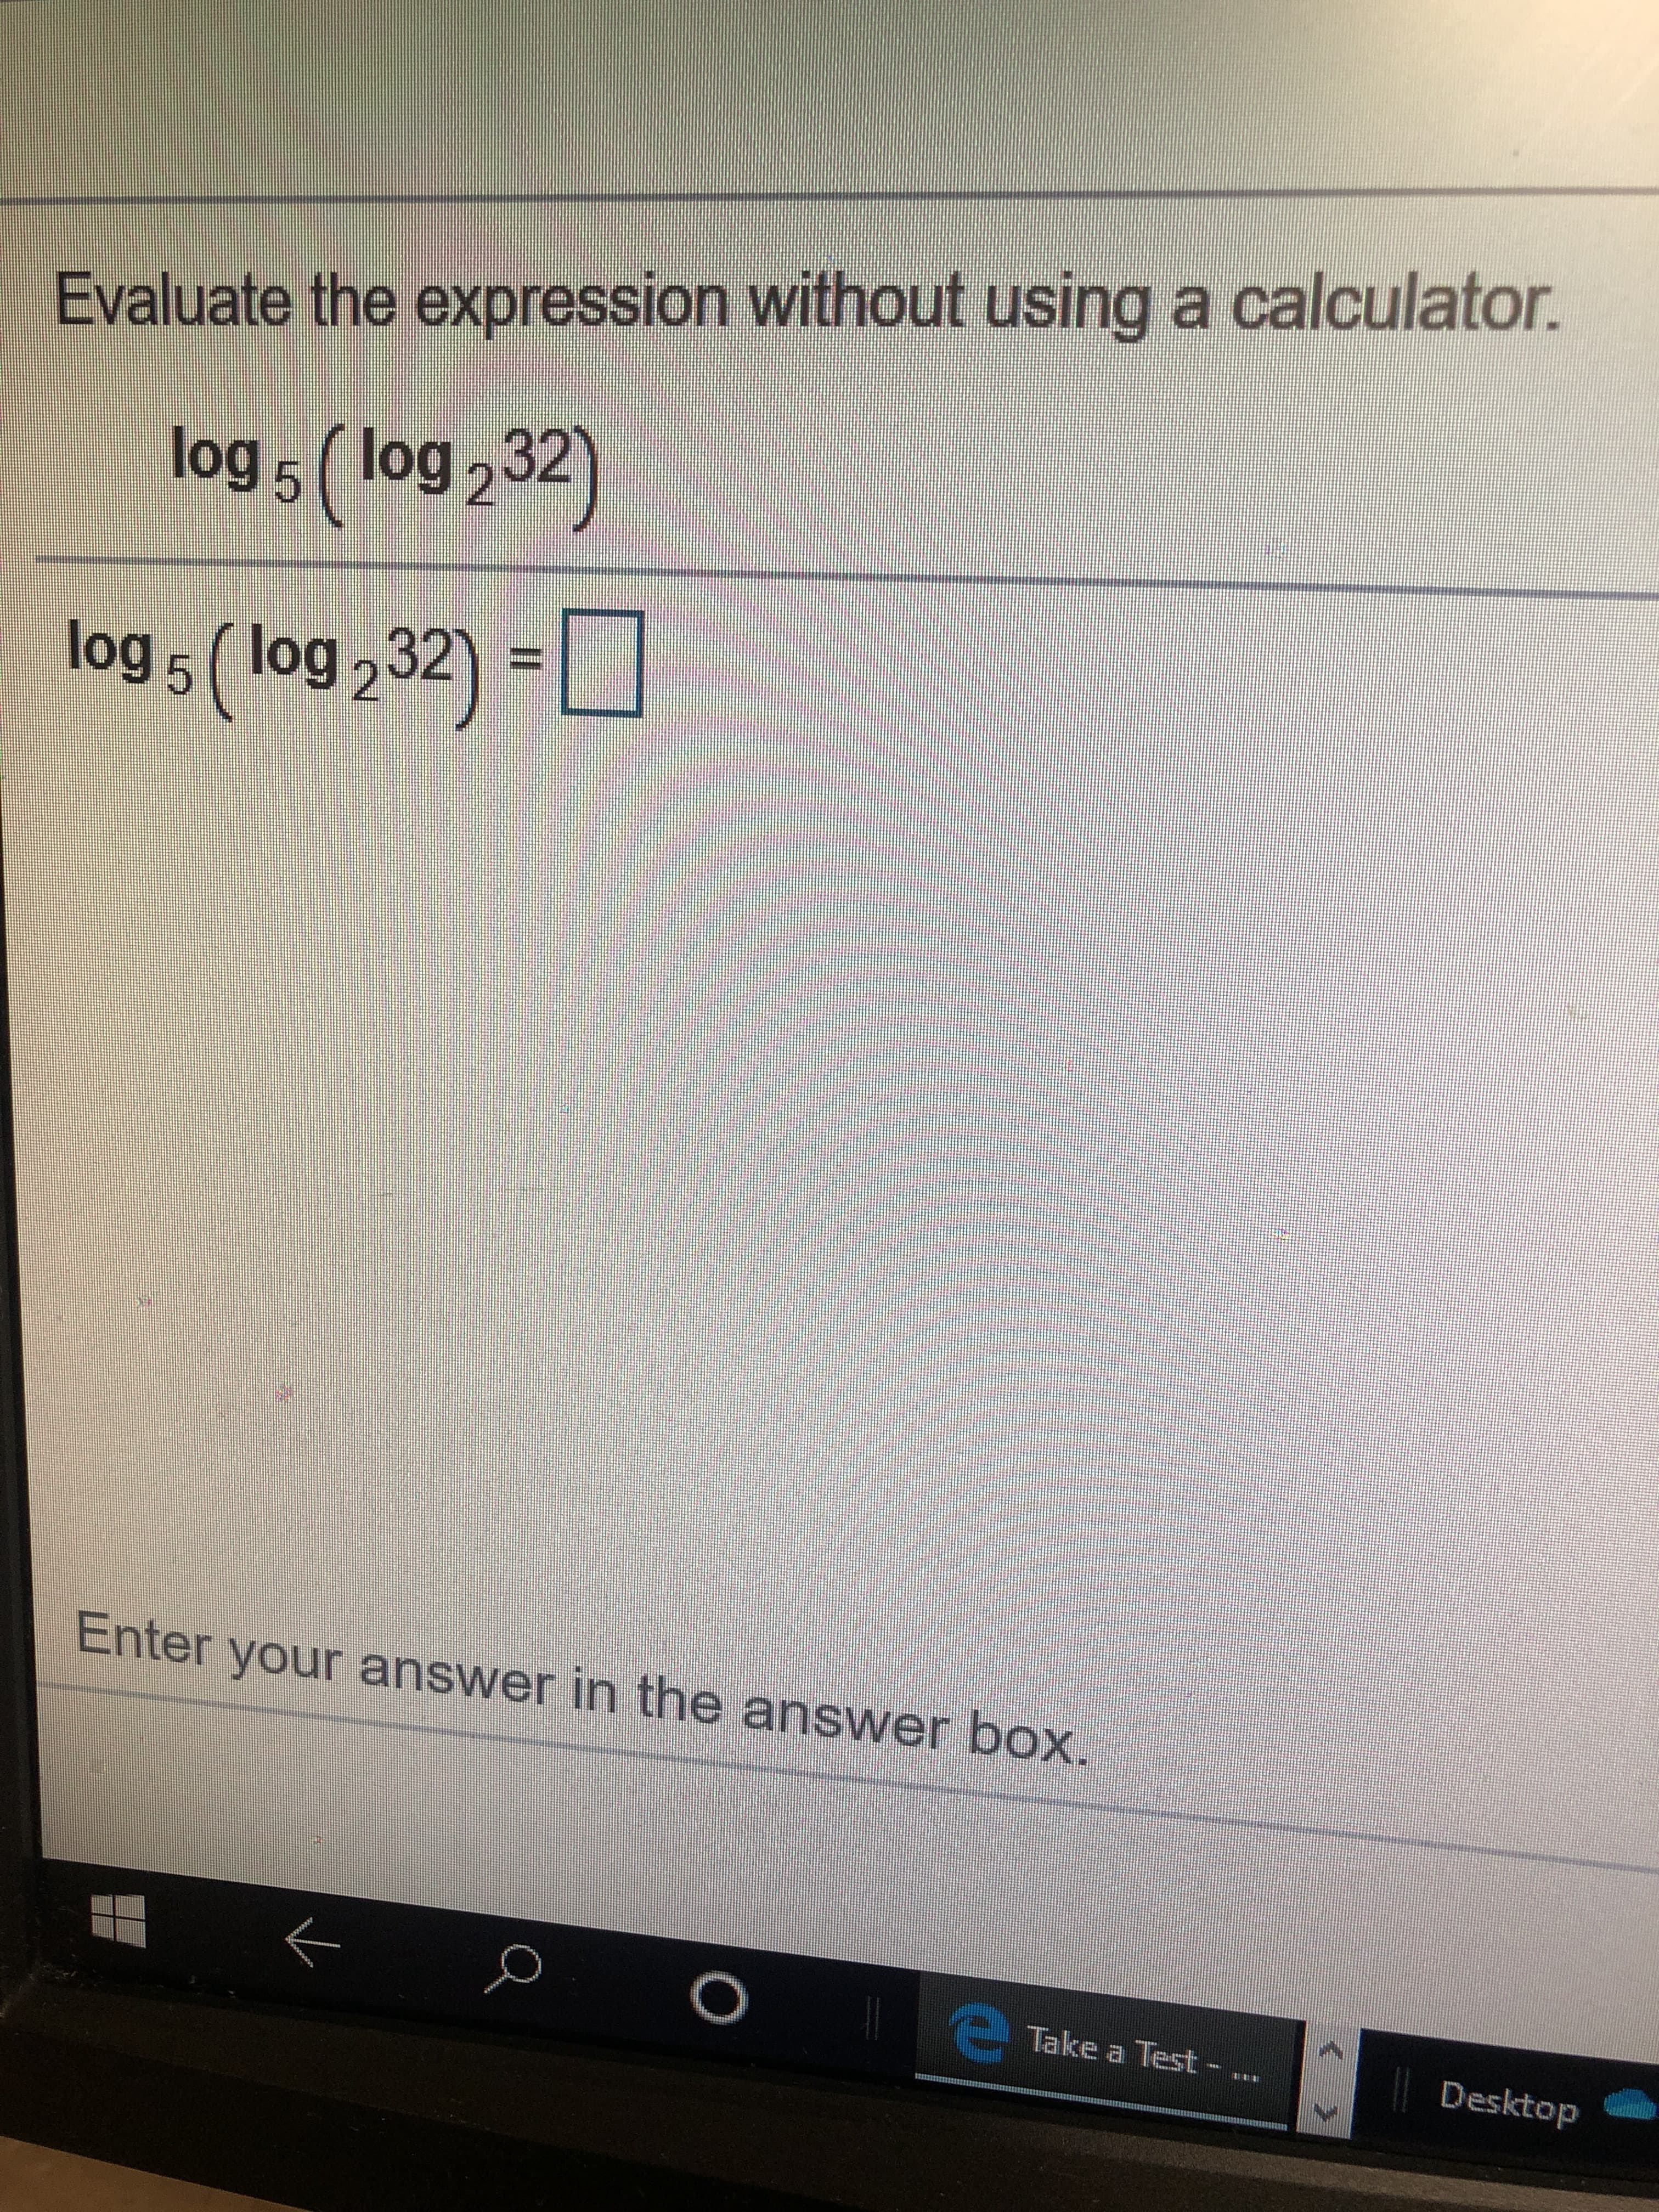 Evaluate the expression without using a calculator.
log5( log232
log 5 ( log 232)
Enter your answer in the answer box.
O
Take a Test- .
Desktop
